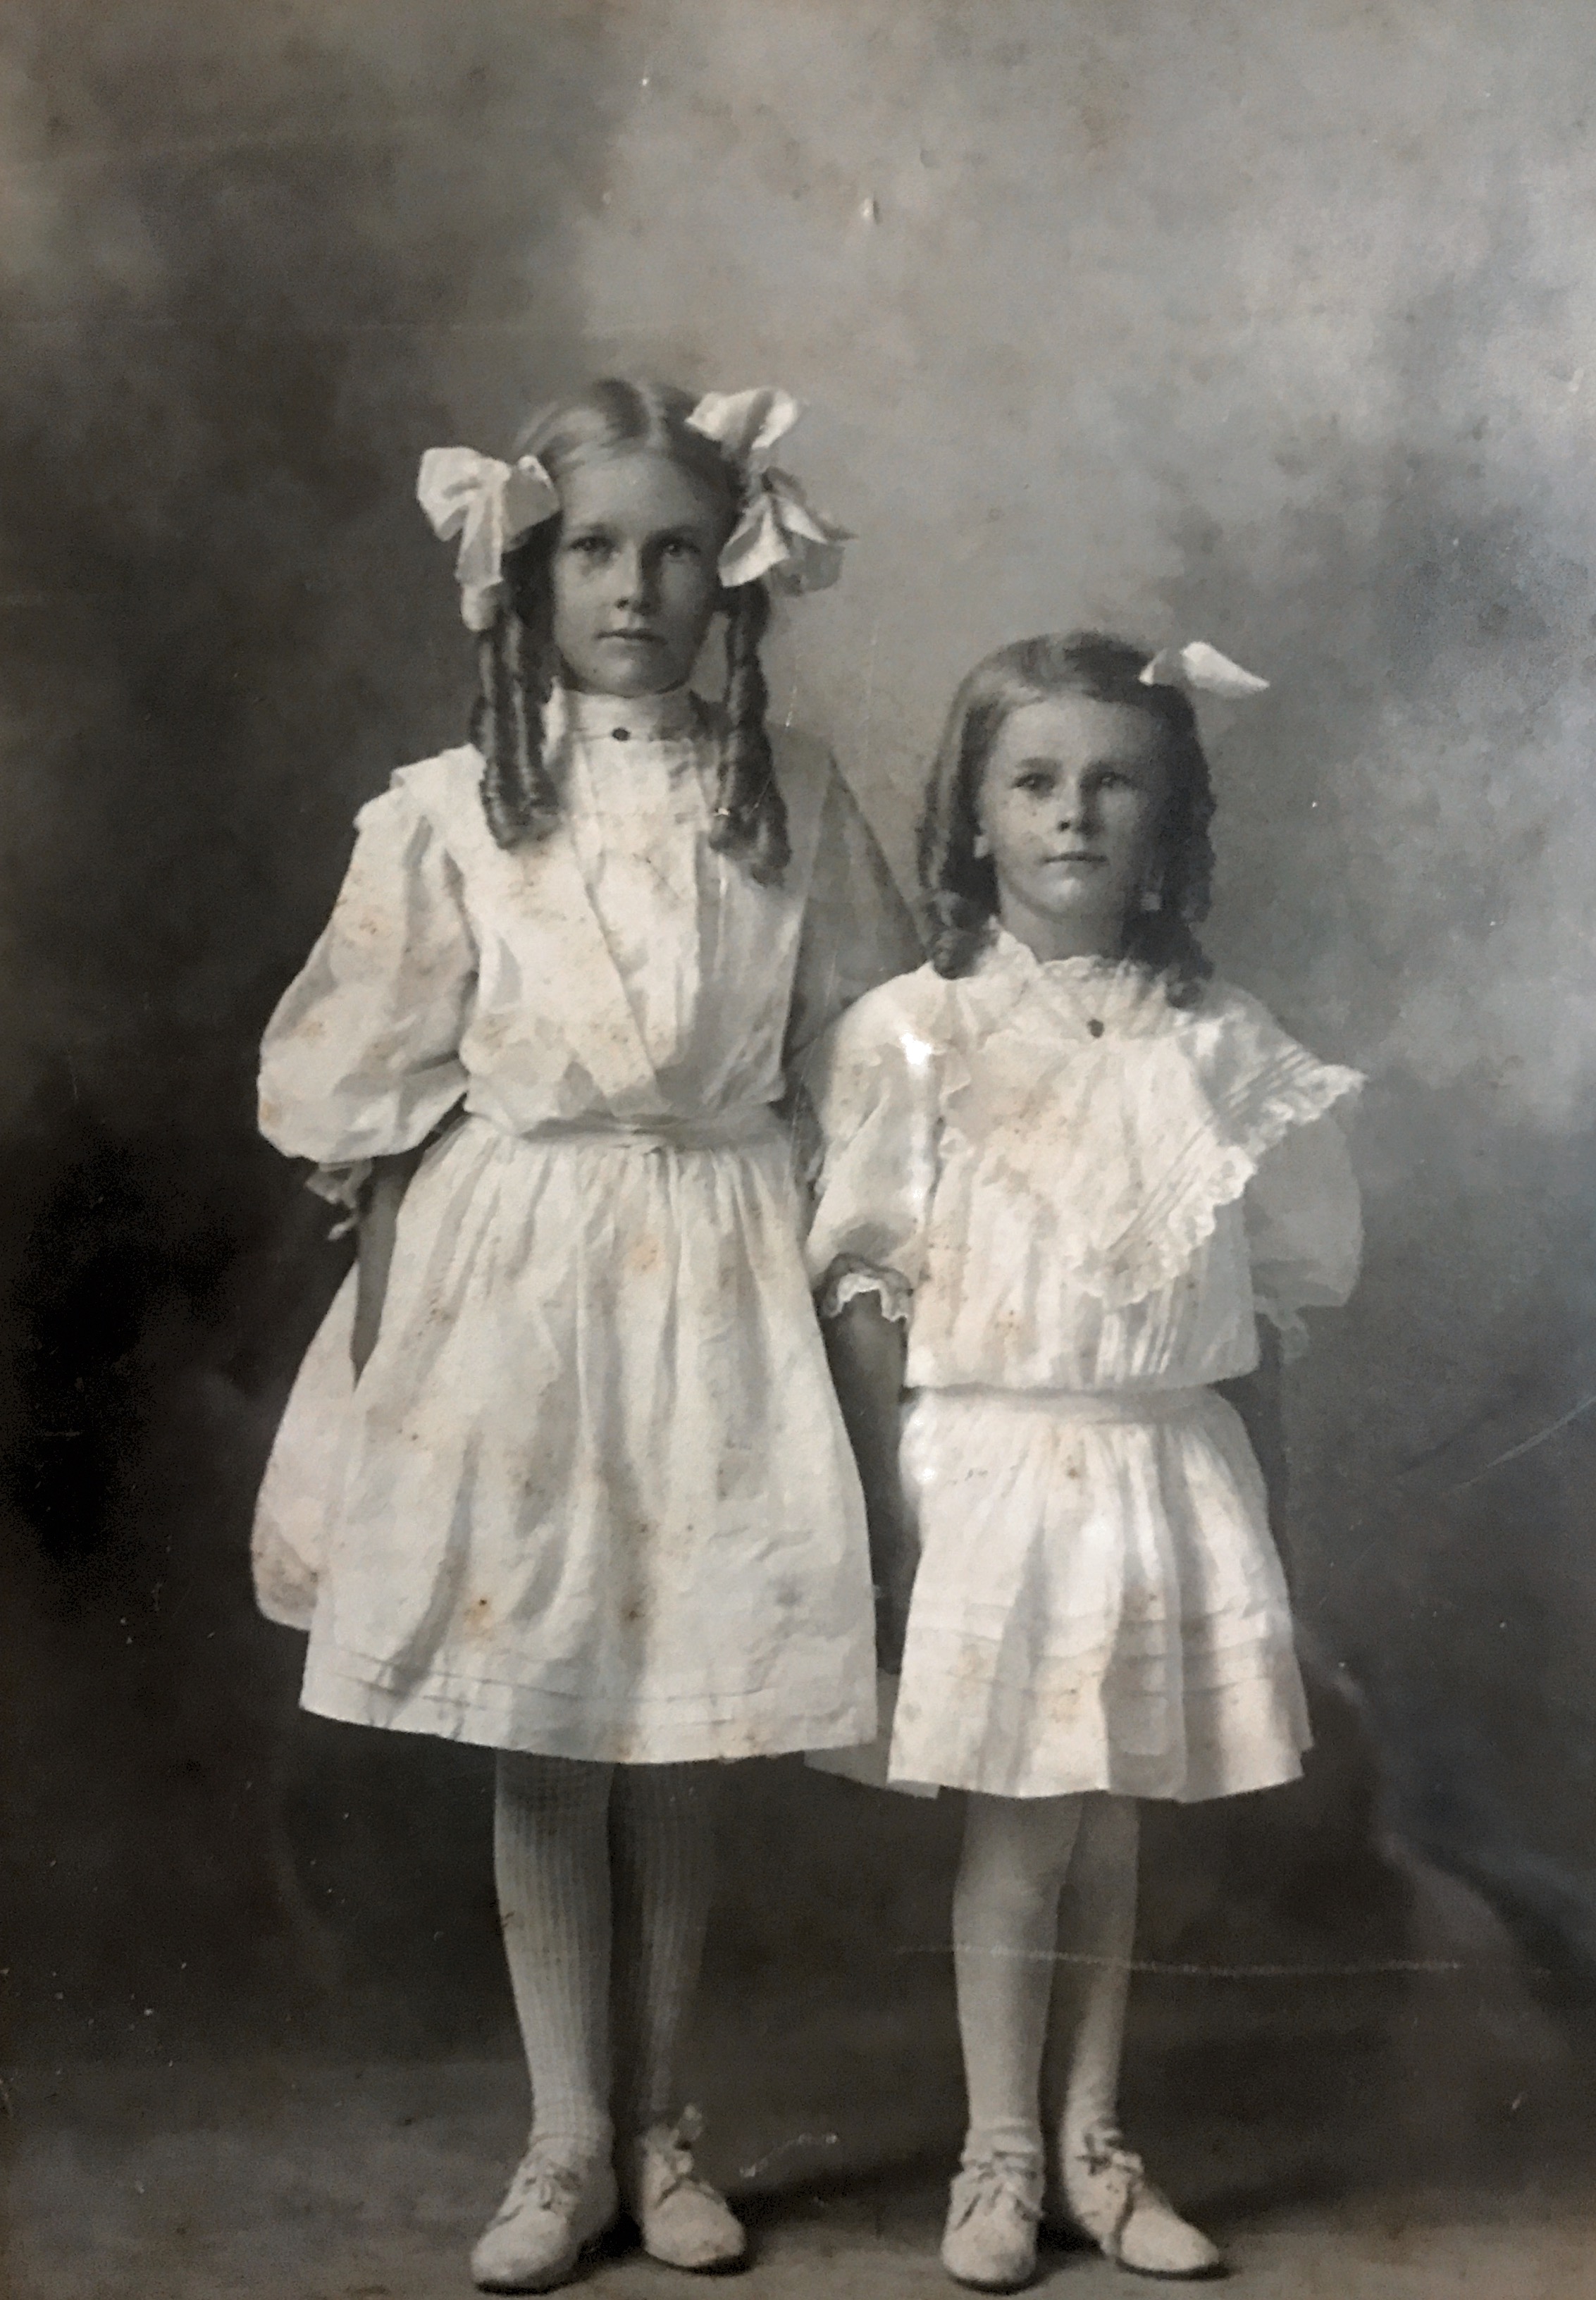 Gretchen Sophia and Bertha Katharine Harms, ages approximately 9 and 6 about 1905. 